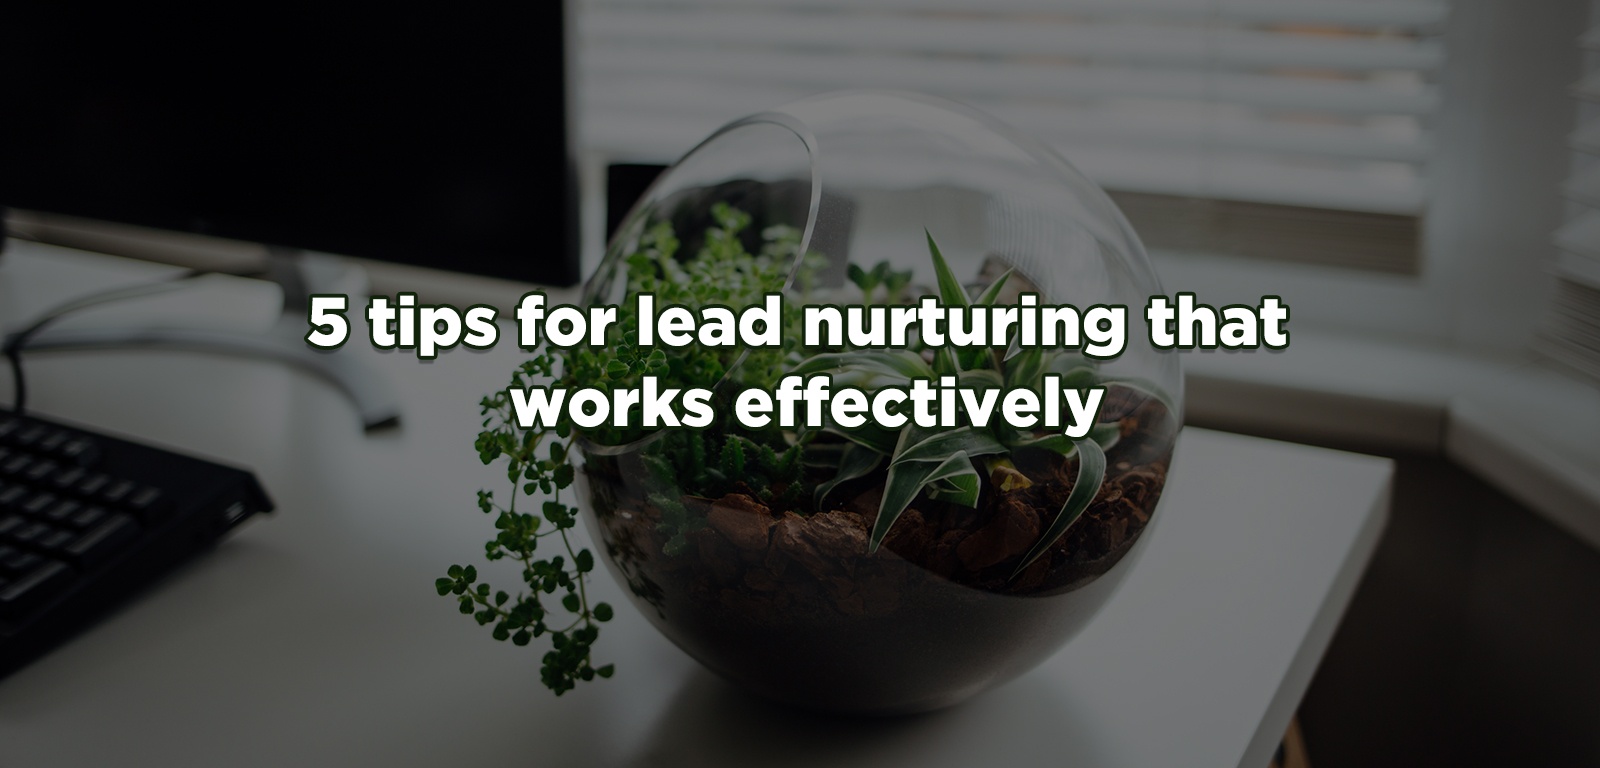 5 tips for lead nurturing that works effectively